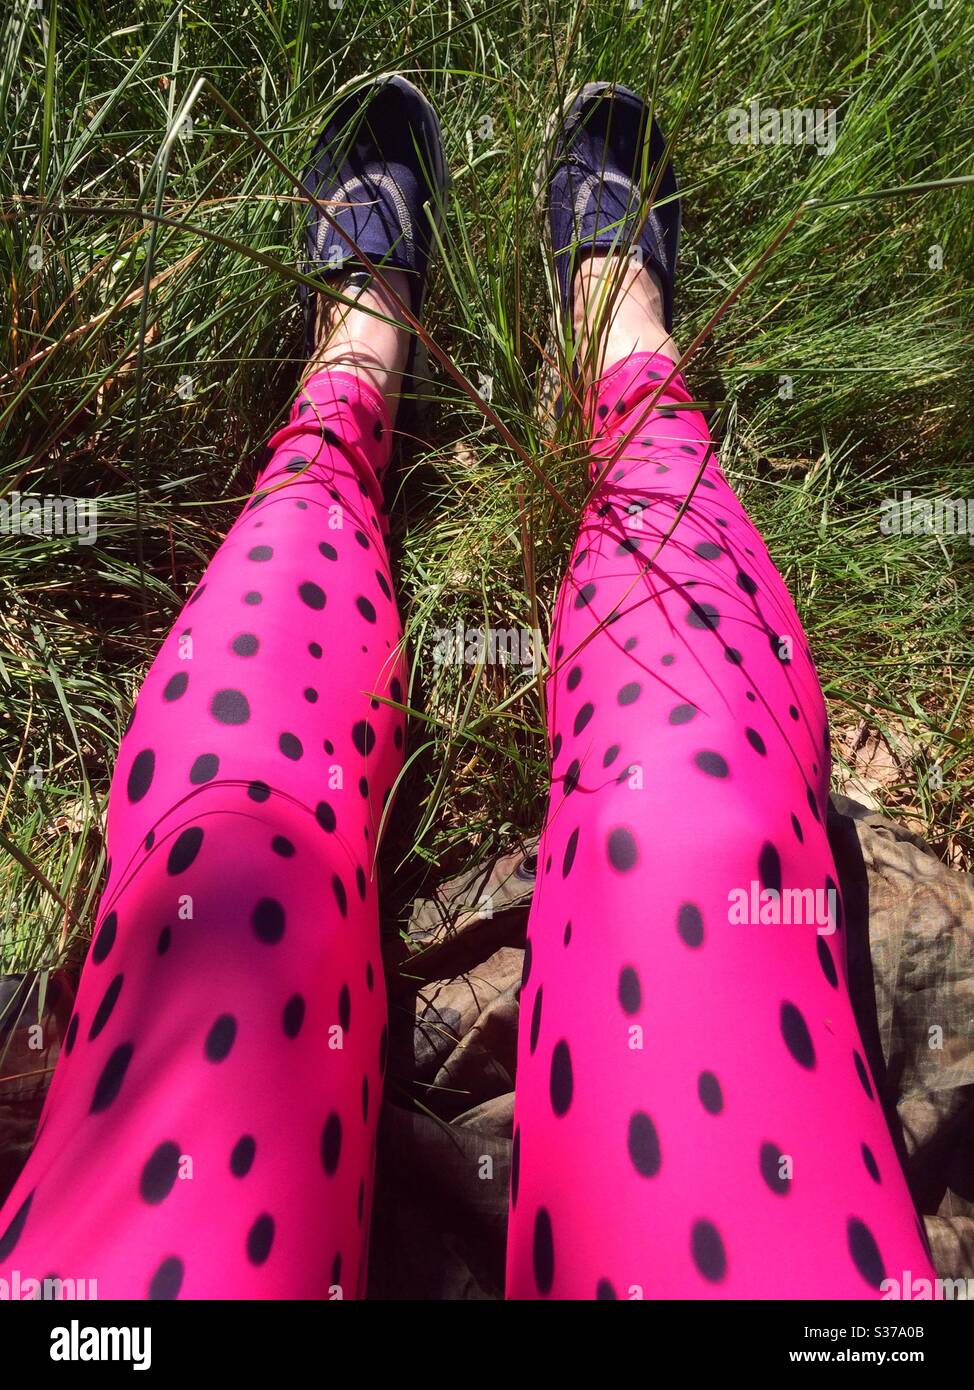 Legs of woman sitting in long grass in summer wearing brightly coloured pink  leggings Stock Photo - Alamy